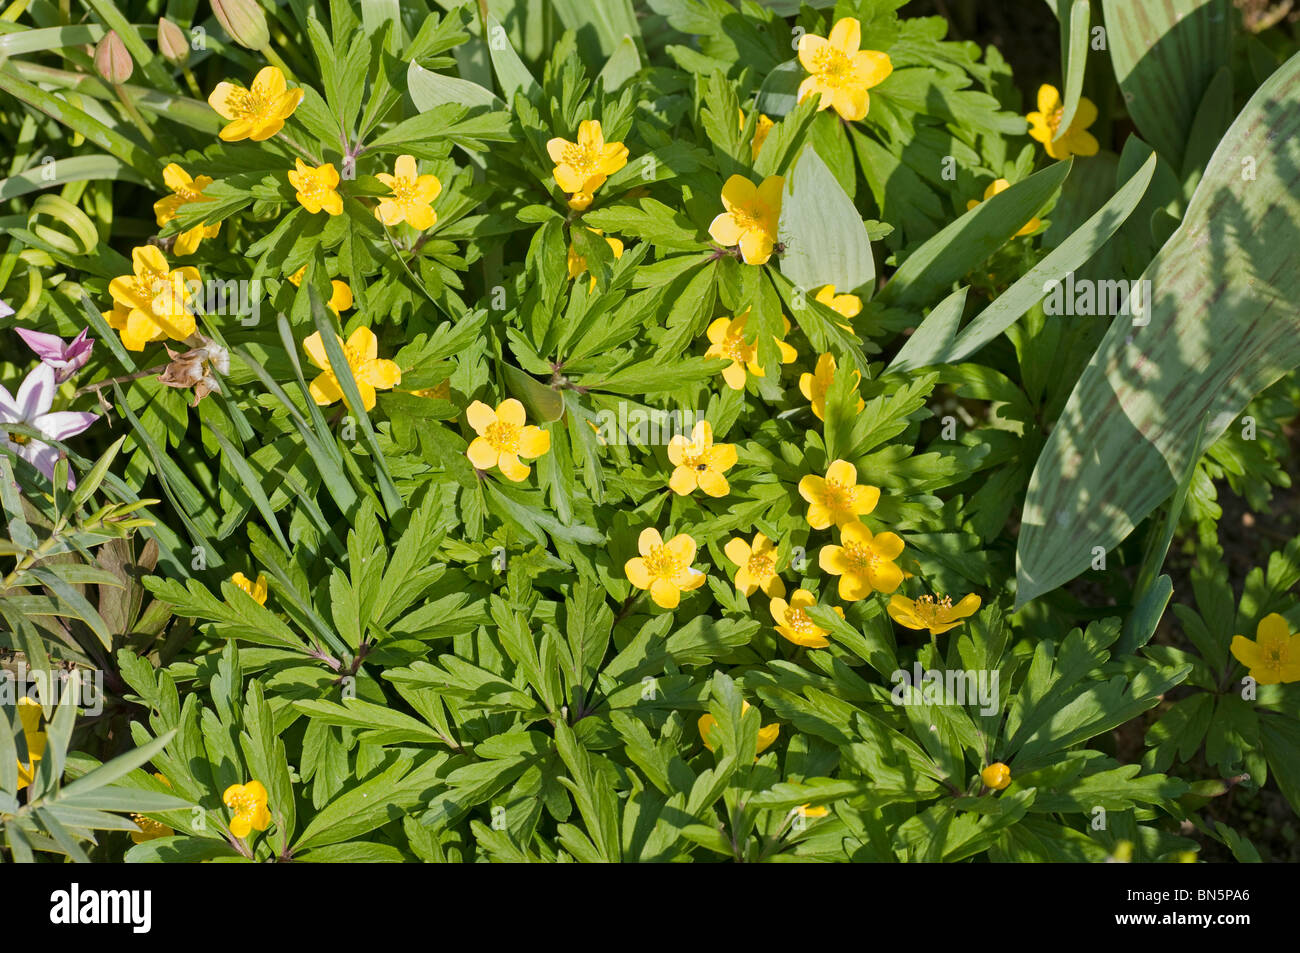 Yellow-flowered Anemone ranunculoides in spring Stock Photo